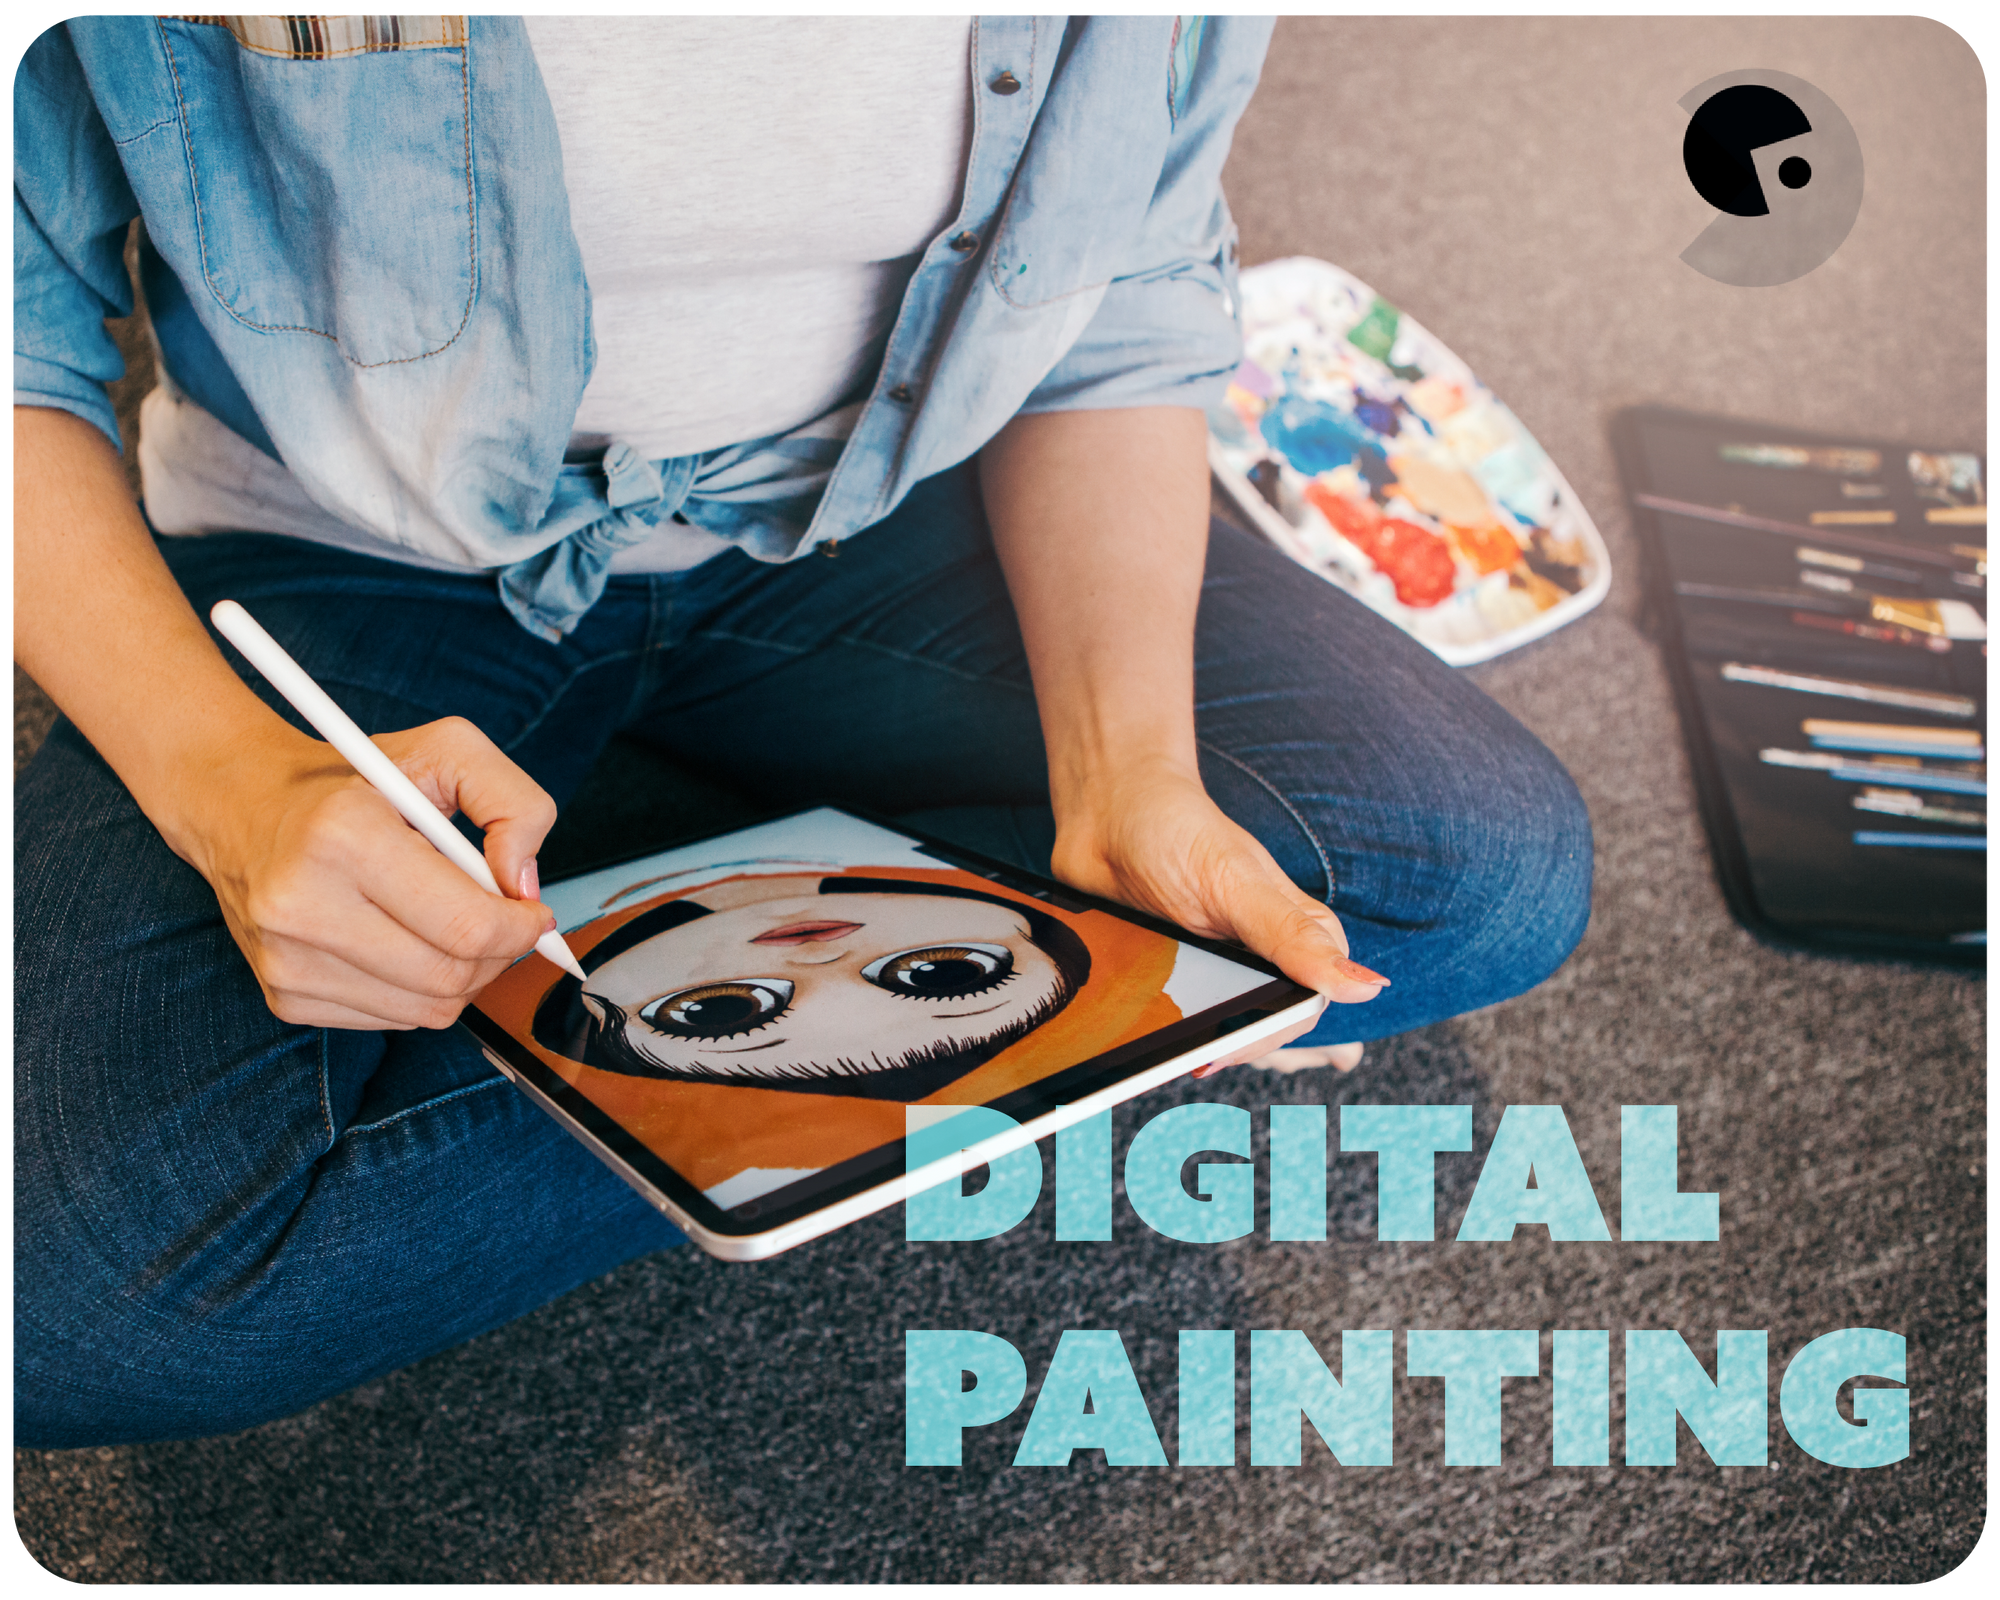 Digital Painting with Photoshop or PaintTool SAI - Part 1 | Grade 9-12